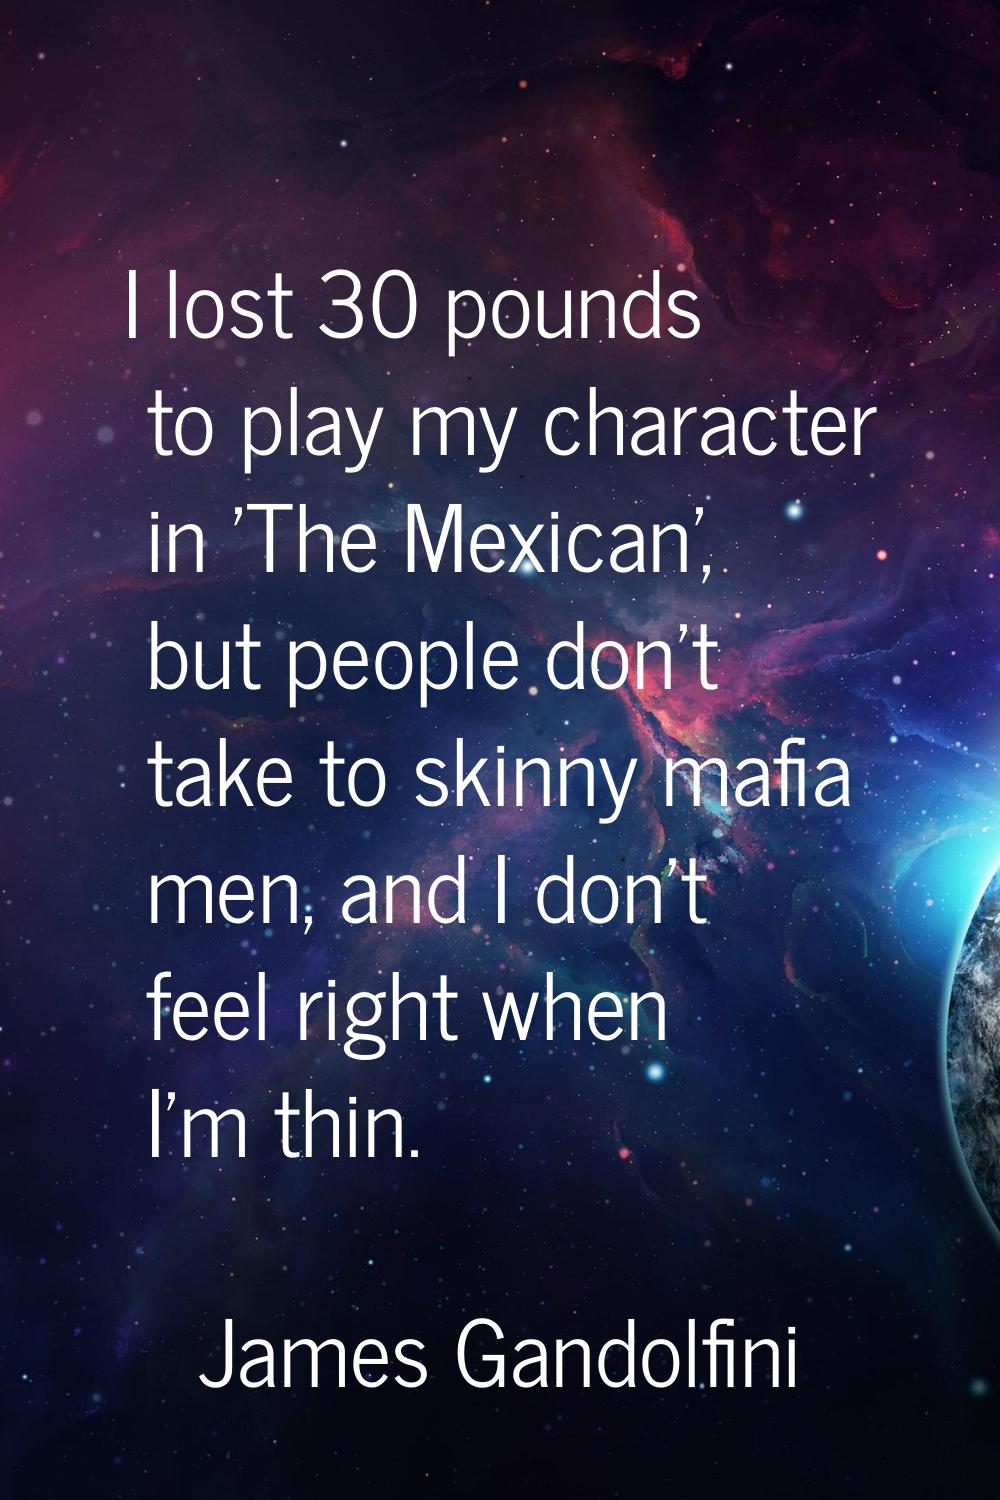 I lost 30 pounds to play my character in 'The Mexican', but people don't take to skinny mafia men, 